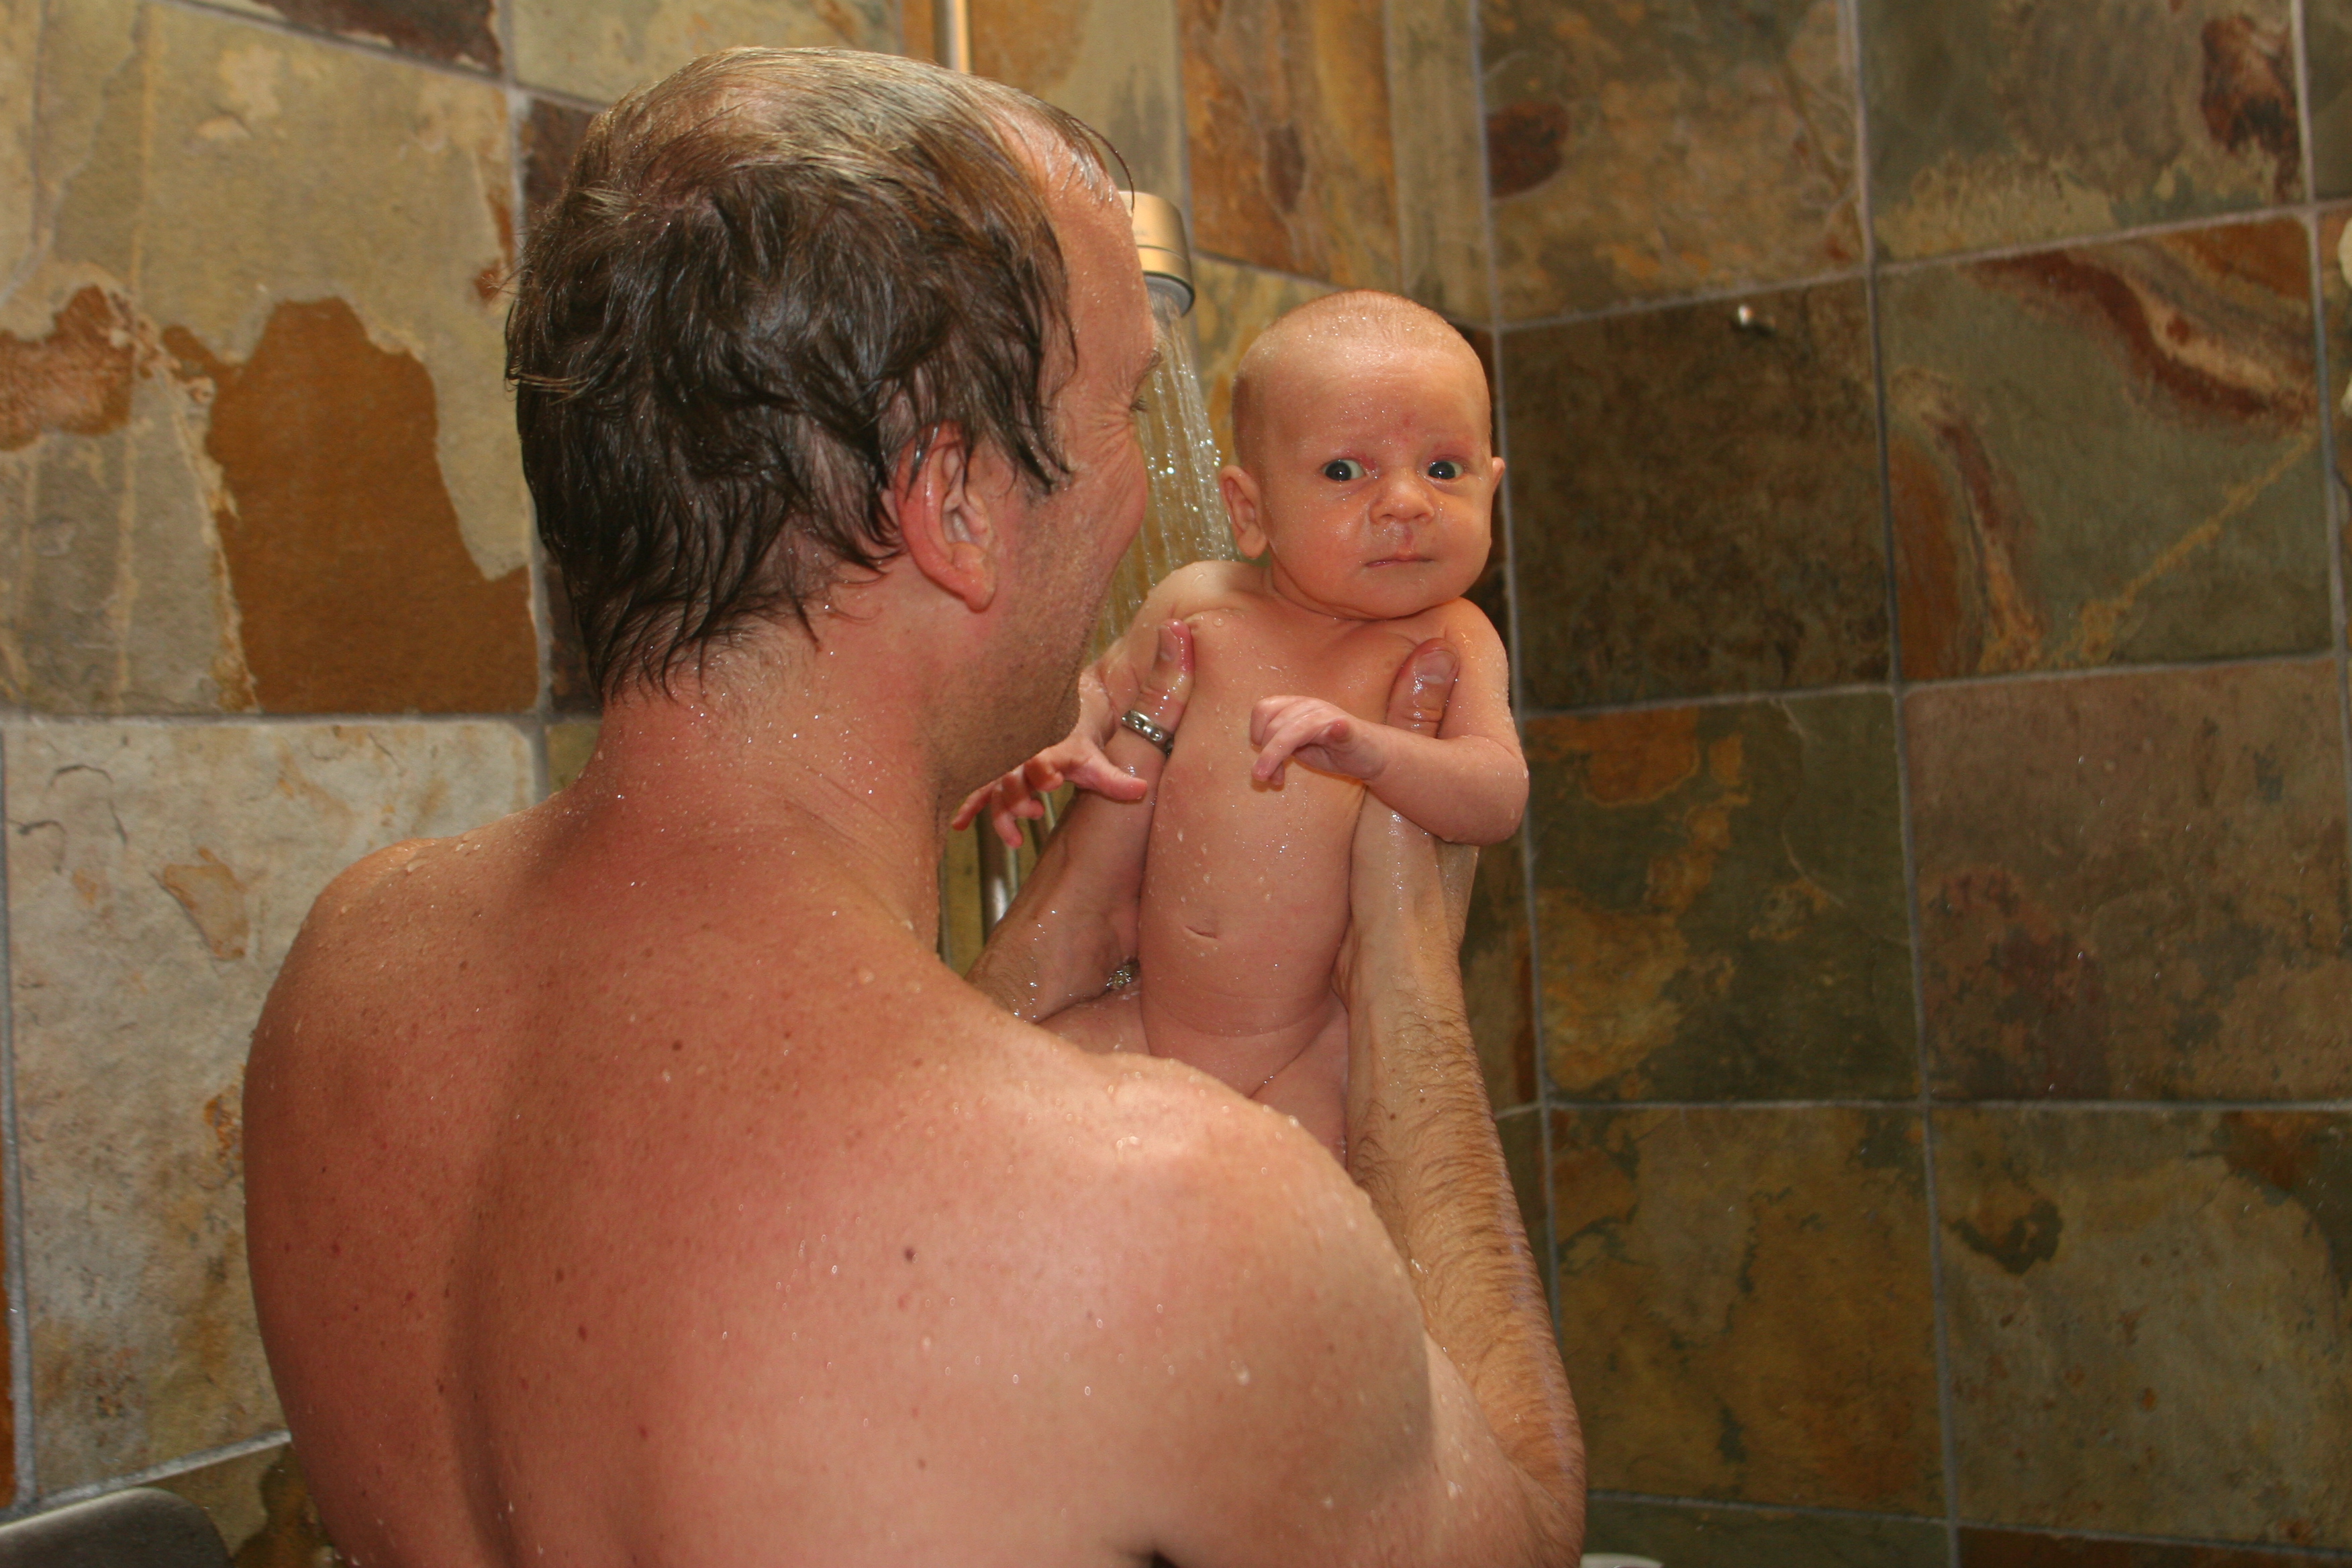 File:Shower Time - Father with baby.jpg - Wikimedia Commons